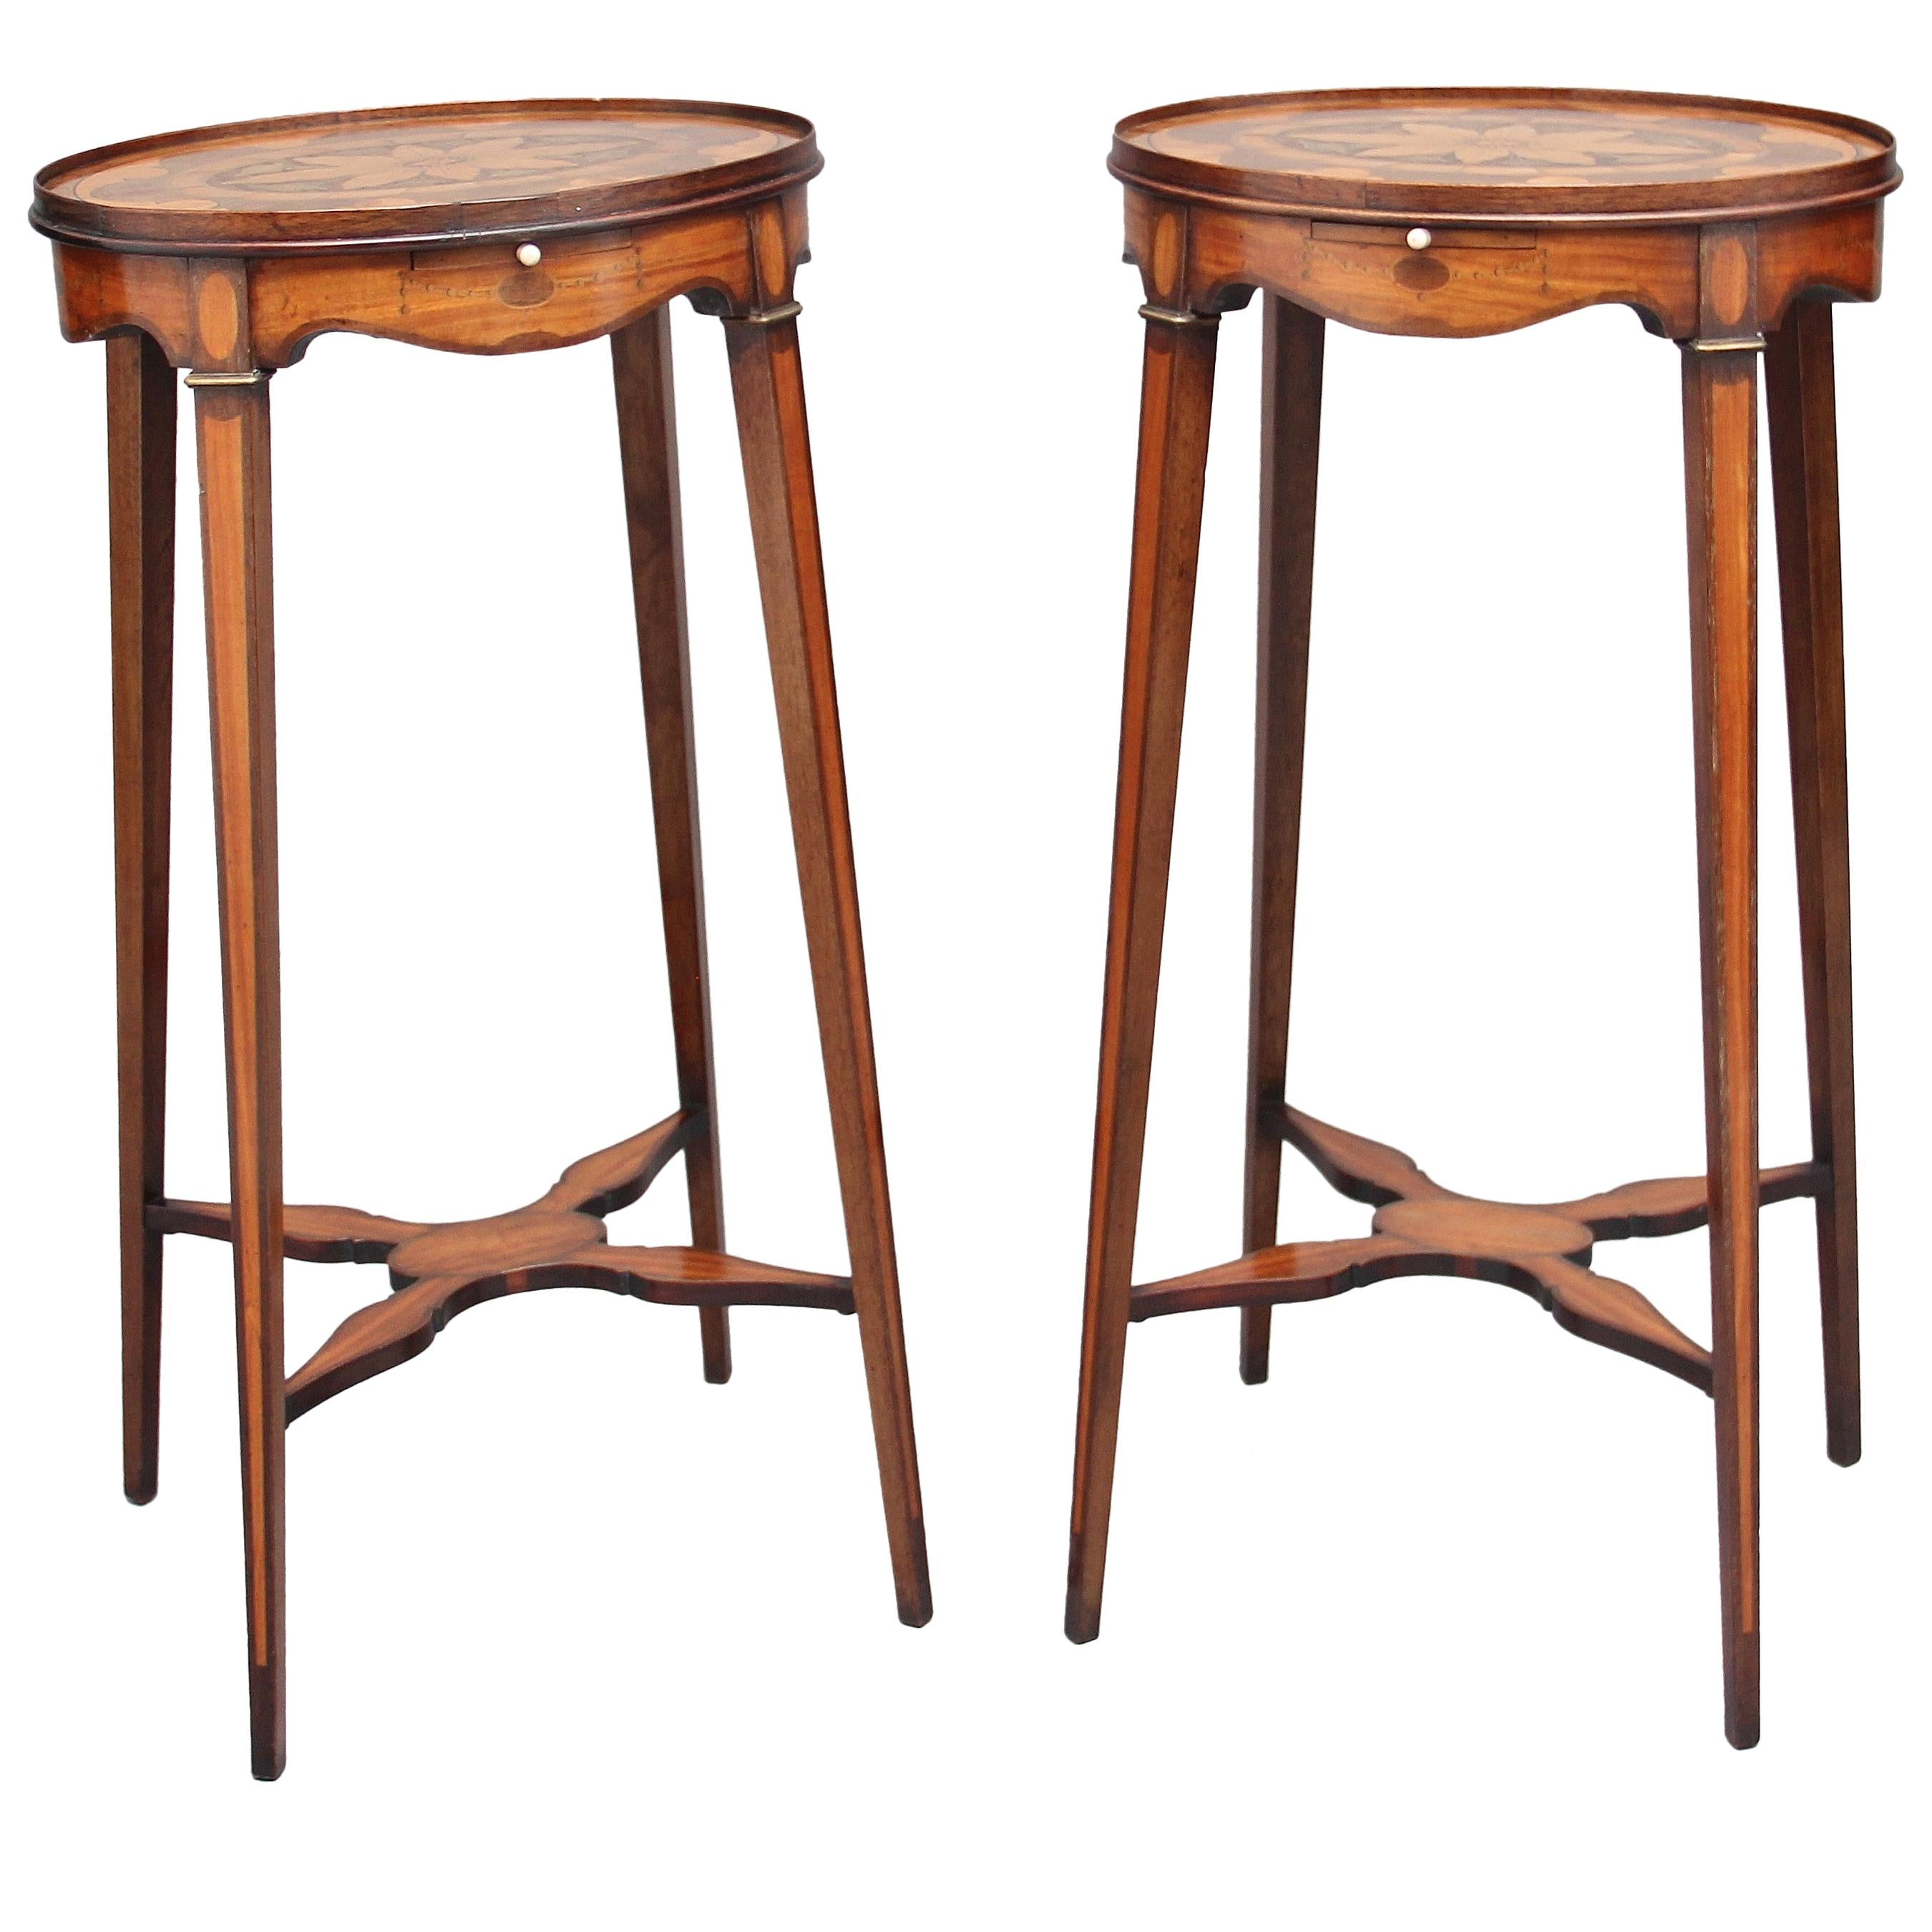 Pair of Sheraton Revival Mahogany and Inlaid Urn Stands For Sale